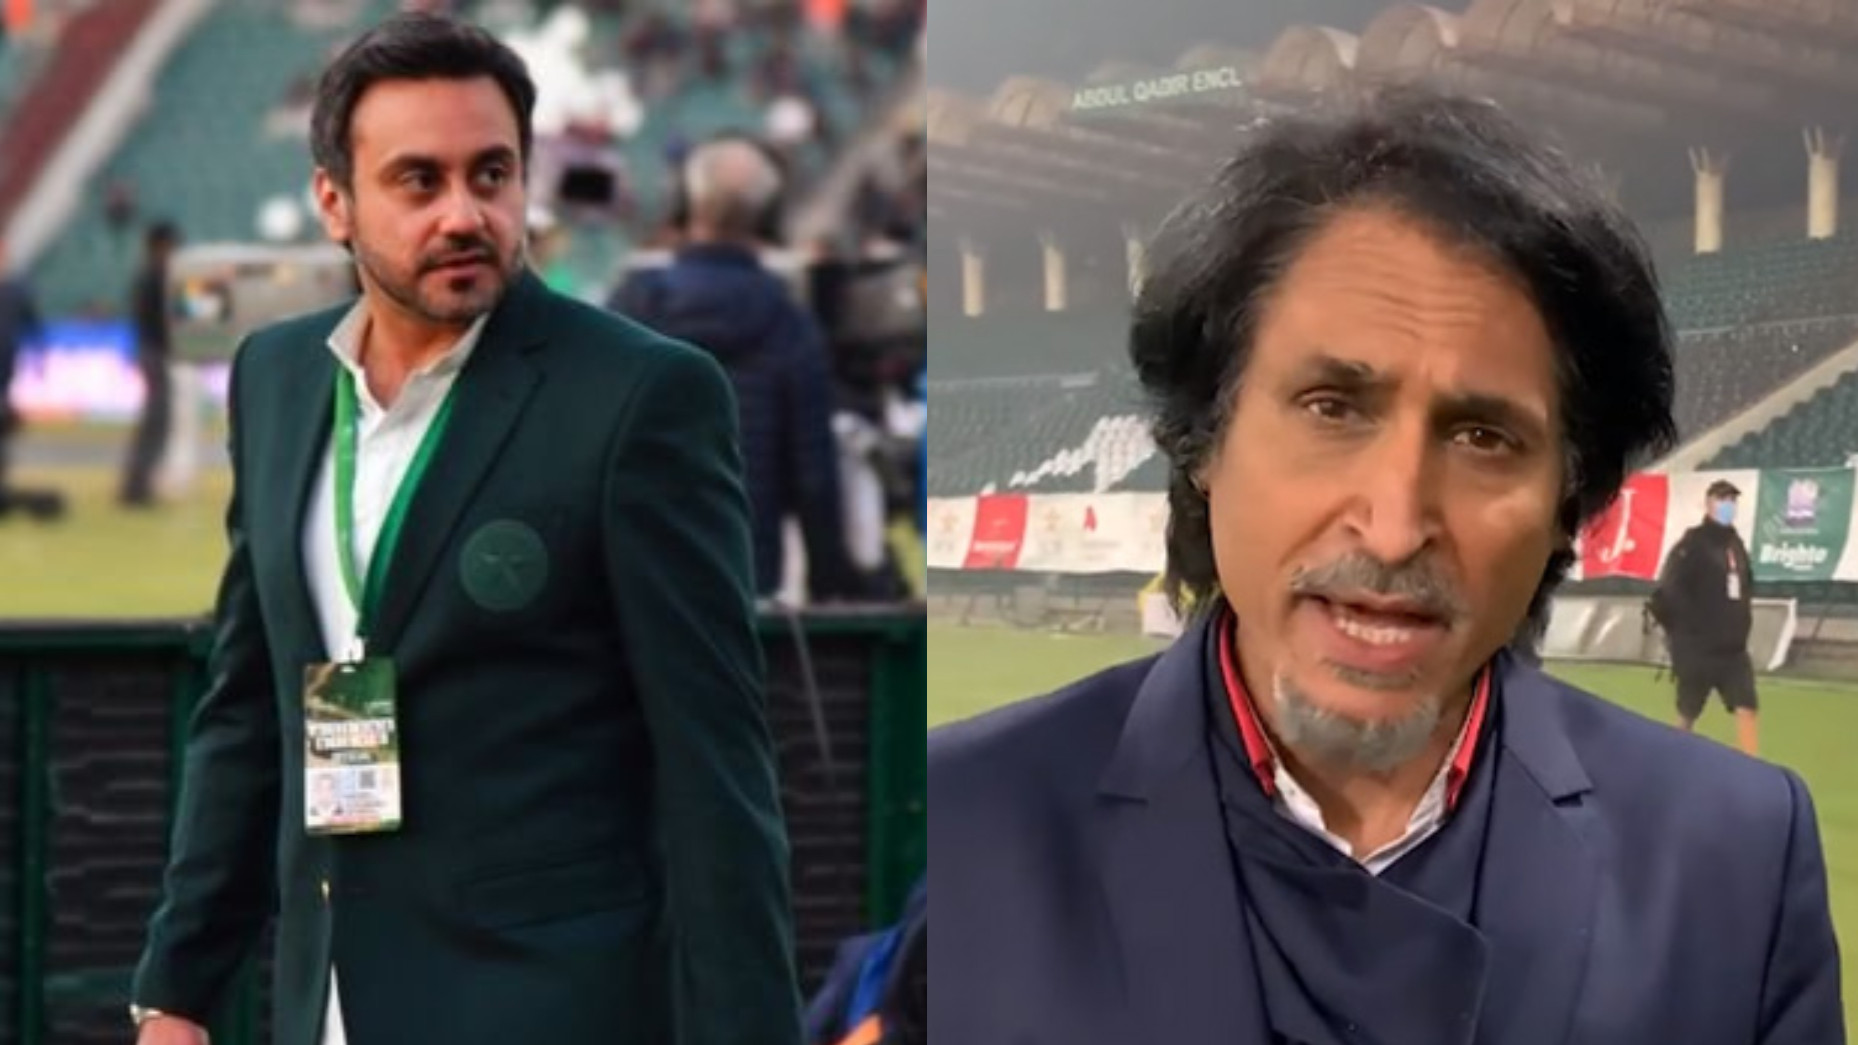 PCB COO responds to Ramiz Raja’s claim that he wasn’t allowed to take his belongings from office